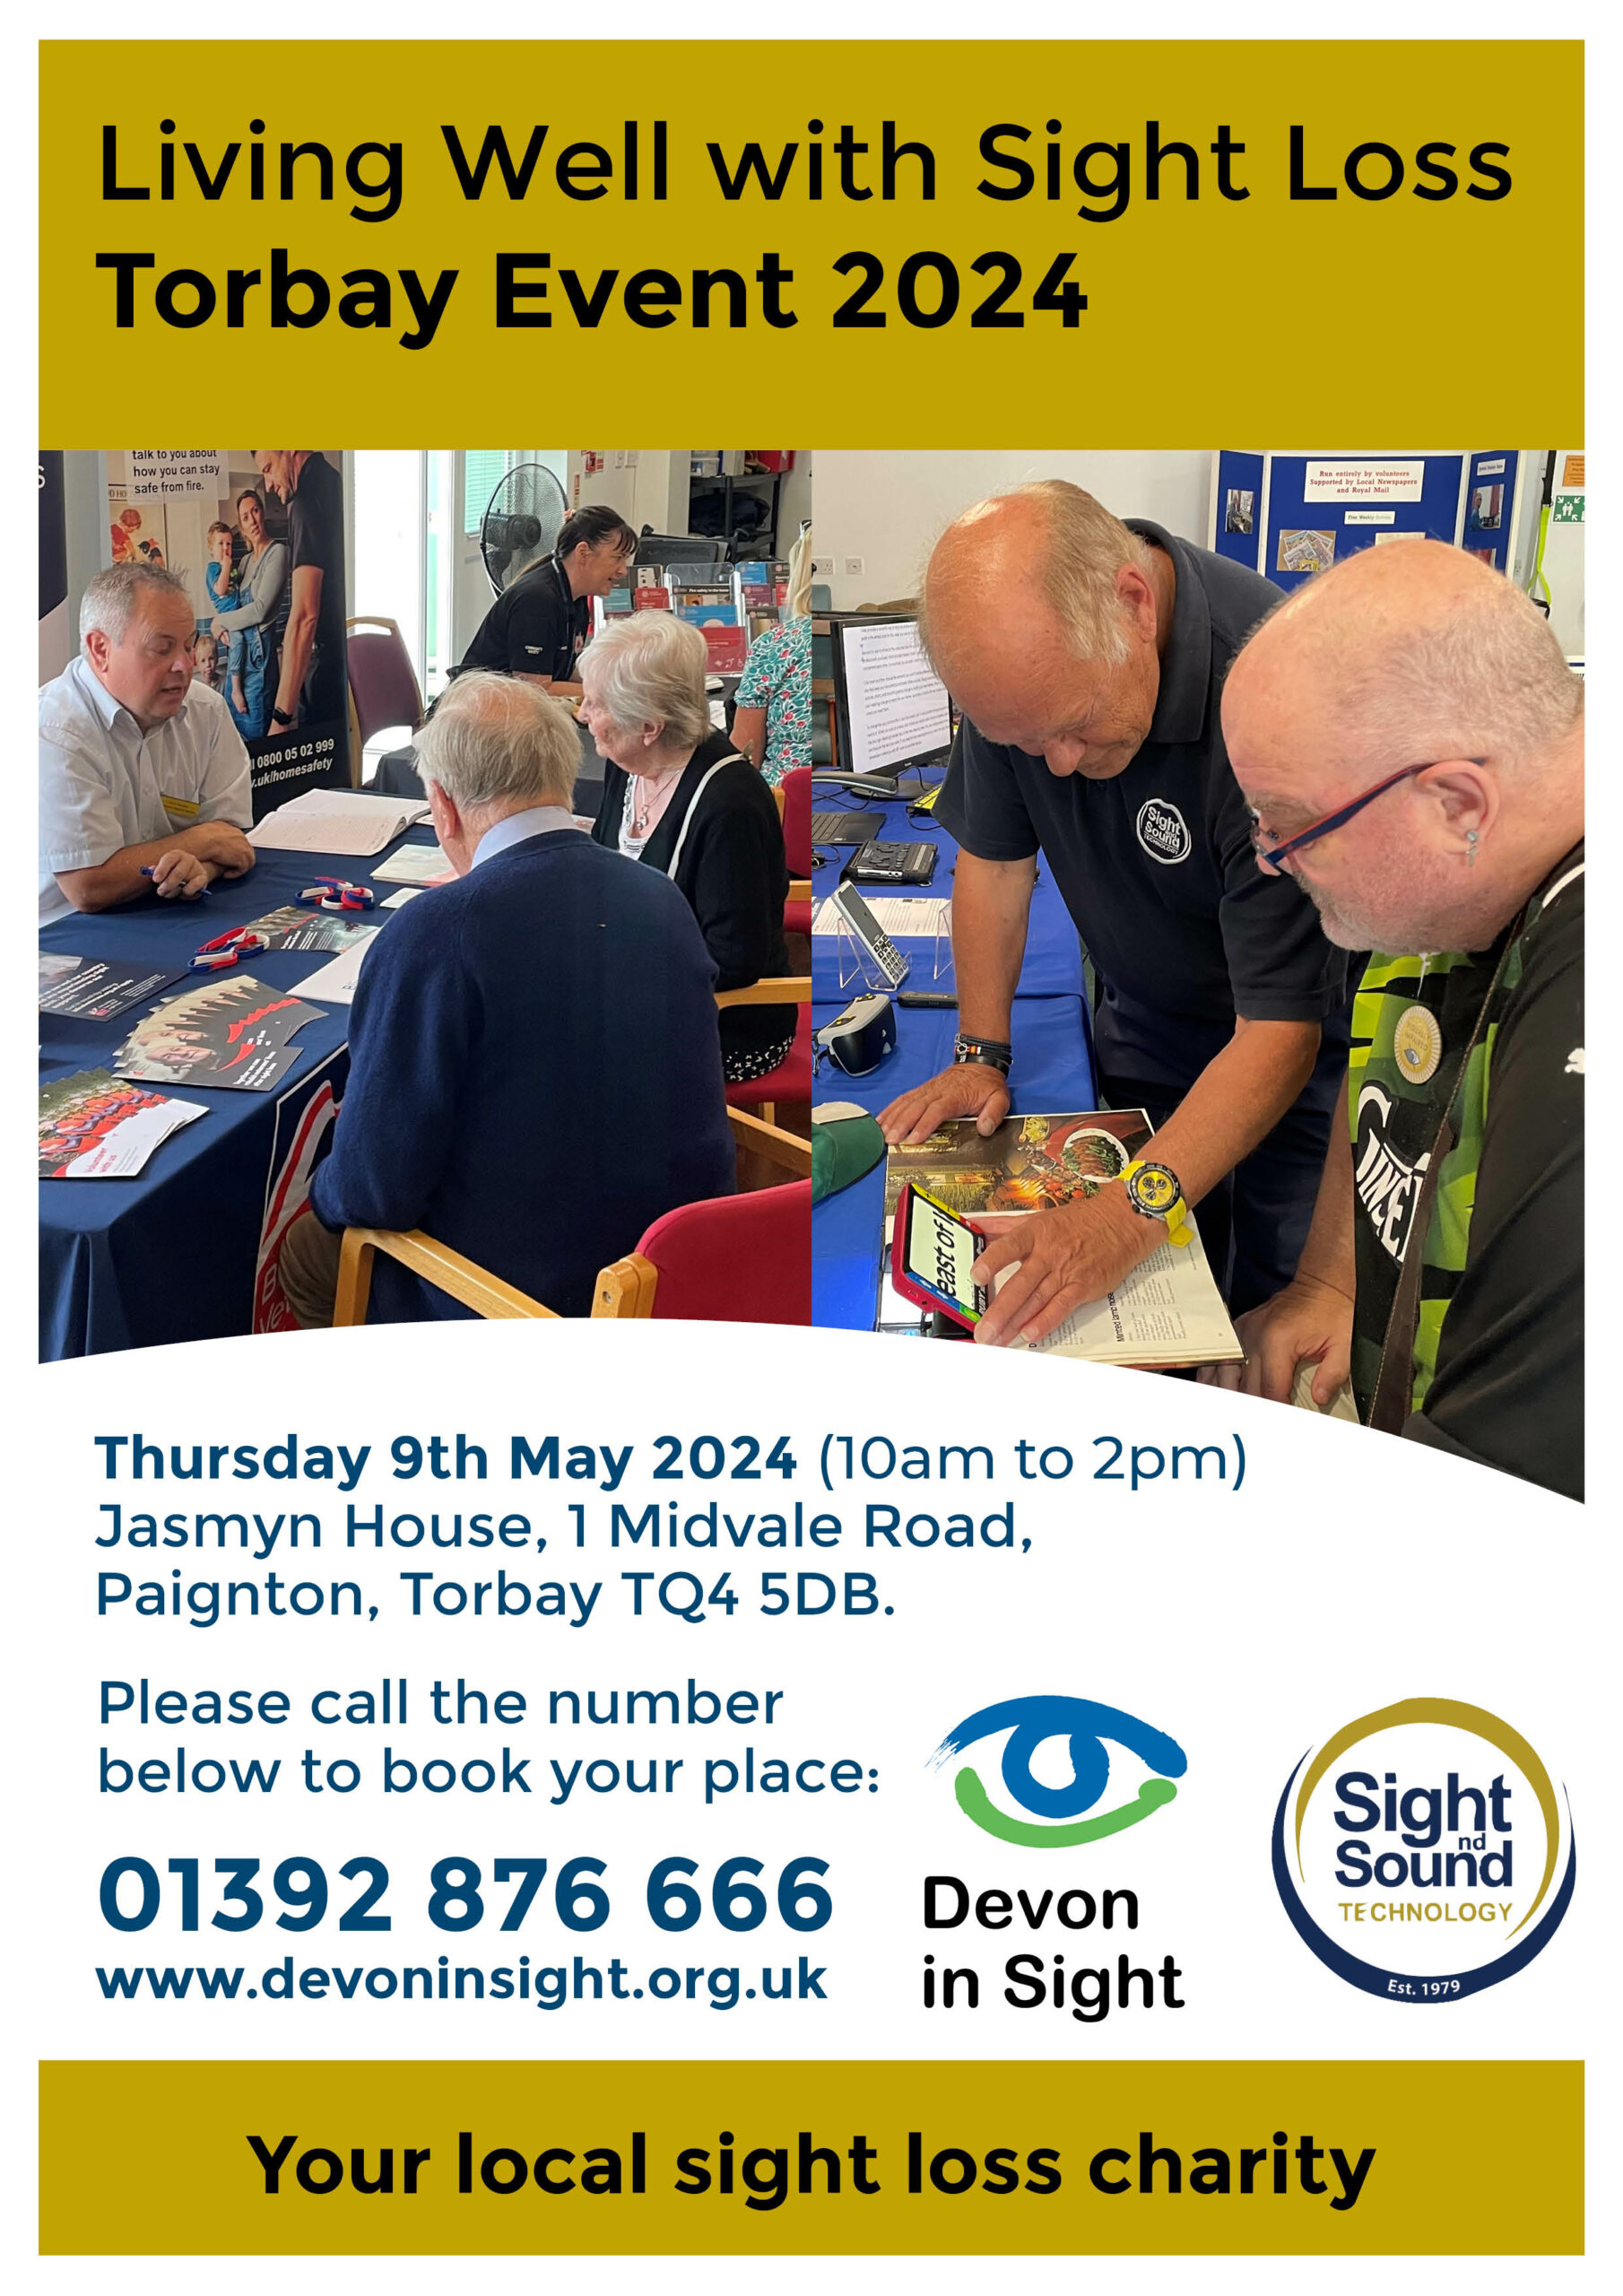 Flyer advertising the Living Well with Sight Loss Event Torbay. Thursday 9th May 2024 (10am to 2pm) Call 01392 876 666 to register your interest. Jasmyn House, 1 Midvale Road, Paignton, Torbay TQ4 5DB. Blind Veterans are talking to clients about Bind Veterans a national charity. Tony from Sight and Soud is demonstrating a Ruby Video Magnifier to a client.